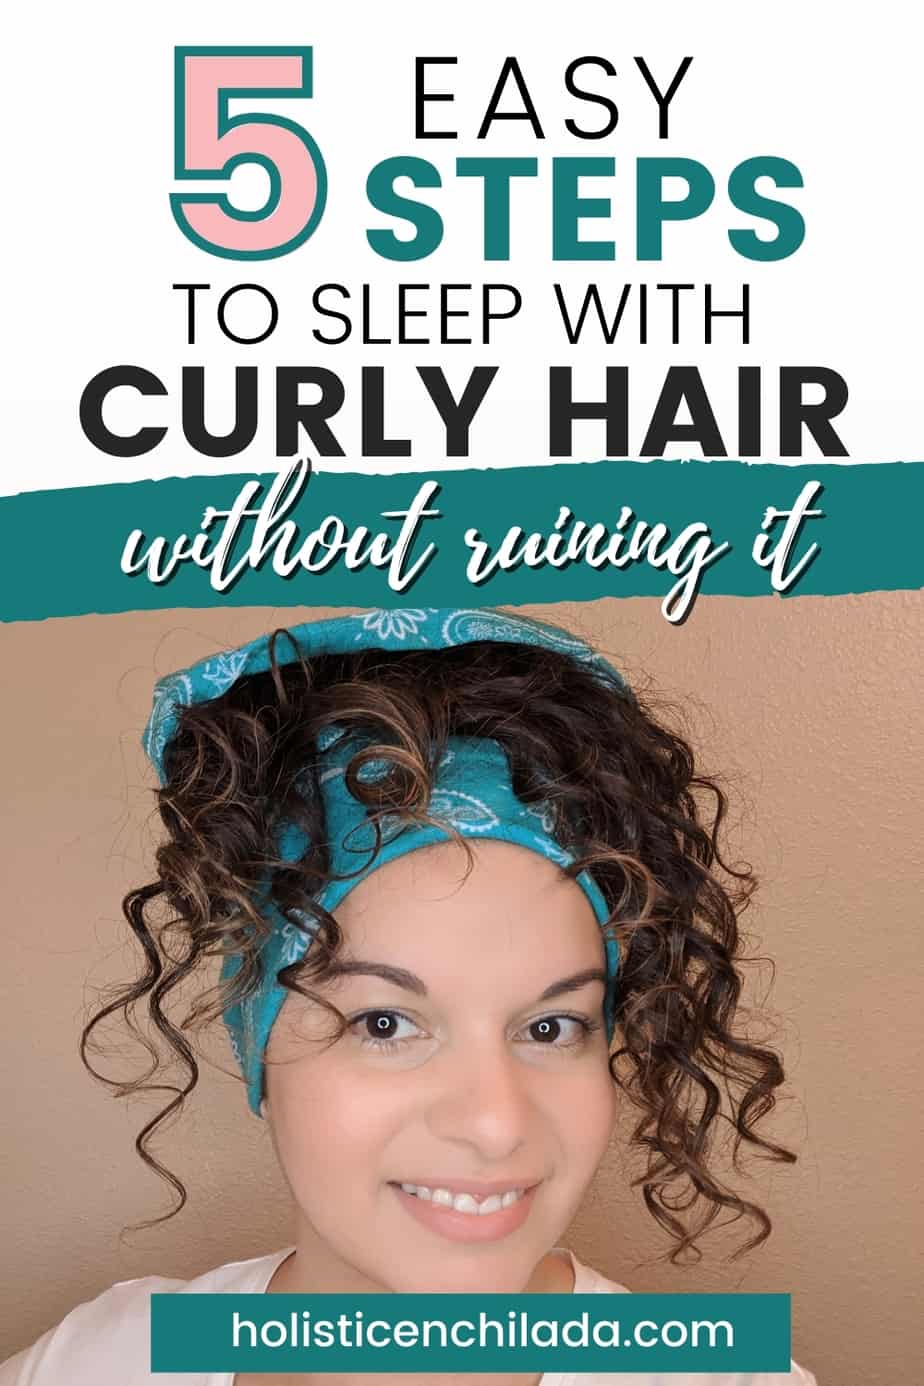 Cute How To Protect Curls When Sleeping for Short hair